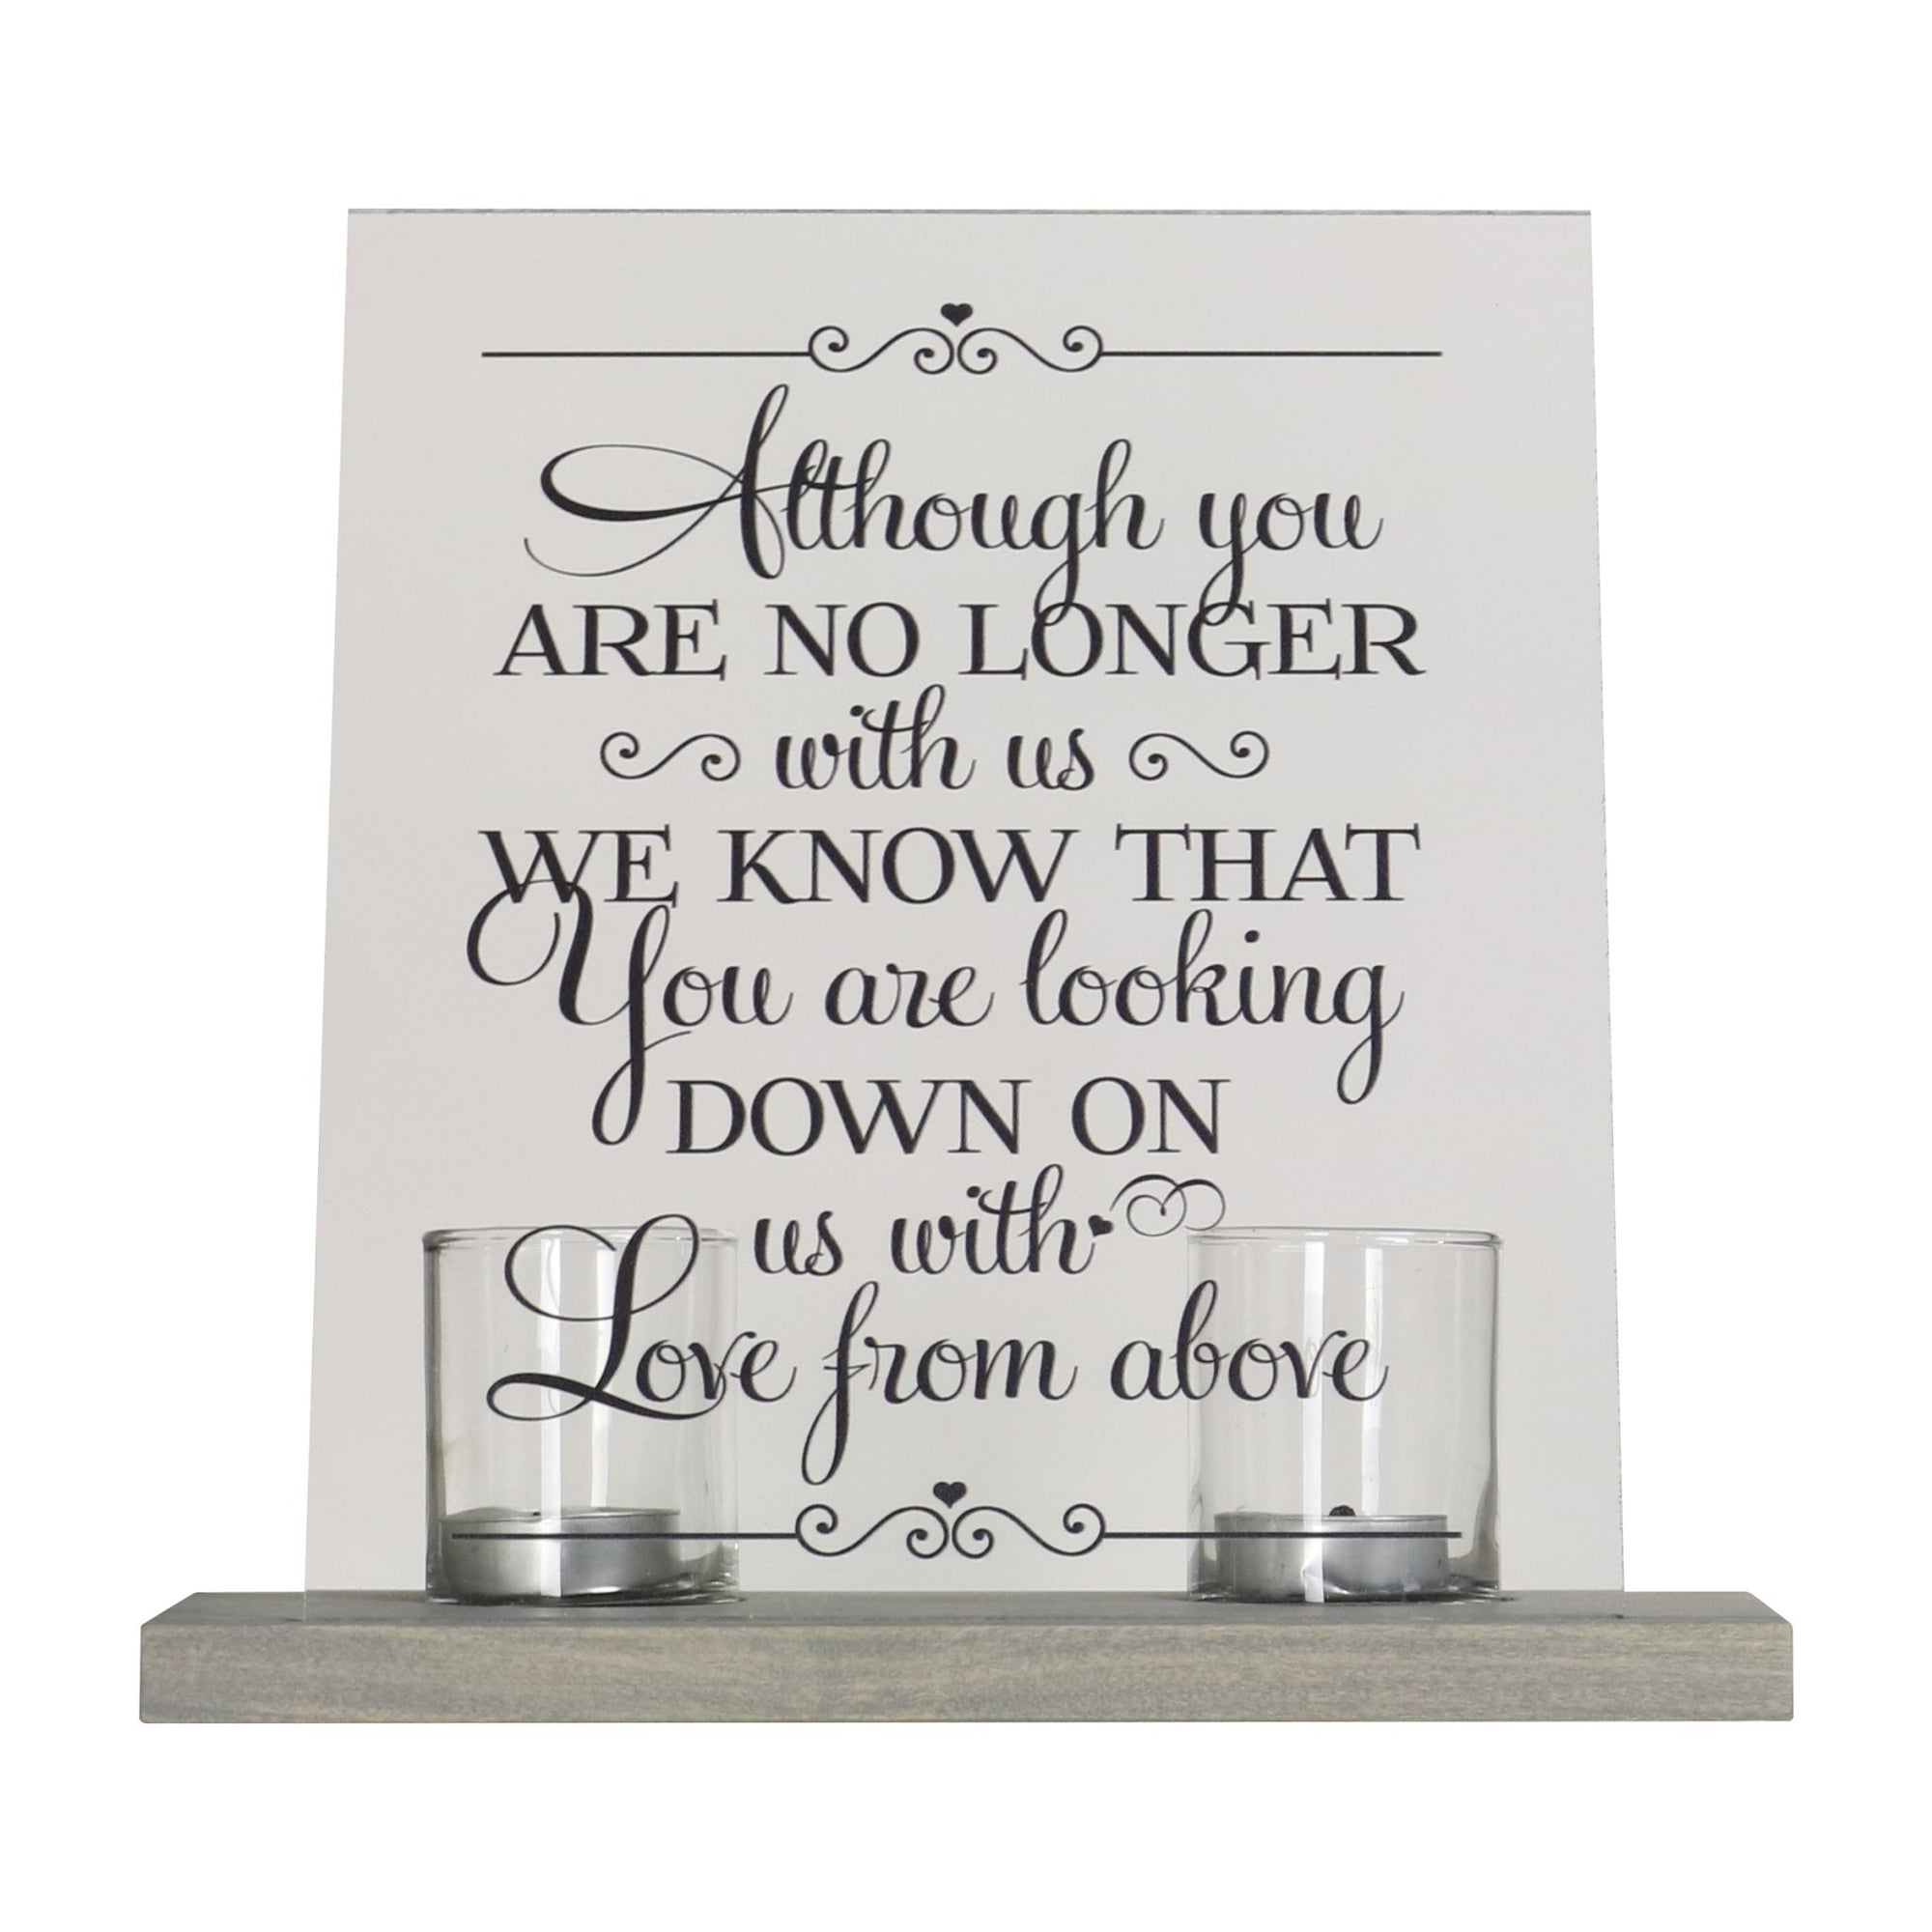 Memorial Acrylic Sign 8x10 with Votive Candle Holder Love From Above - LifeSong Milestones